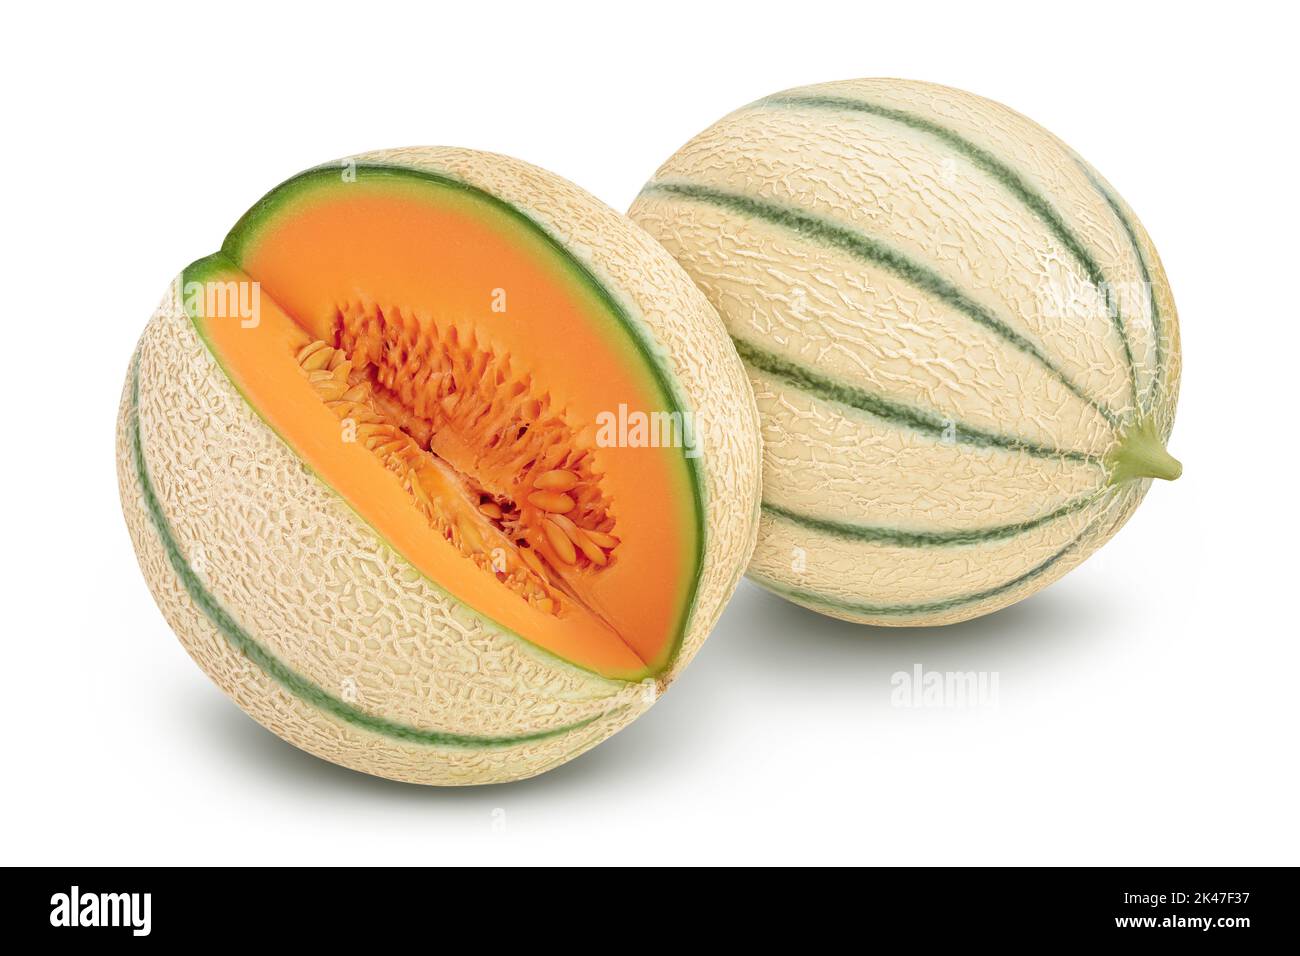 Cantaloupe melon isolated on white background with full depth of field Stock Photo